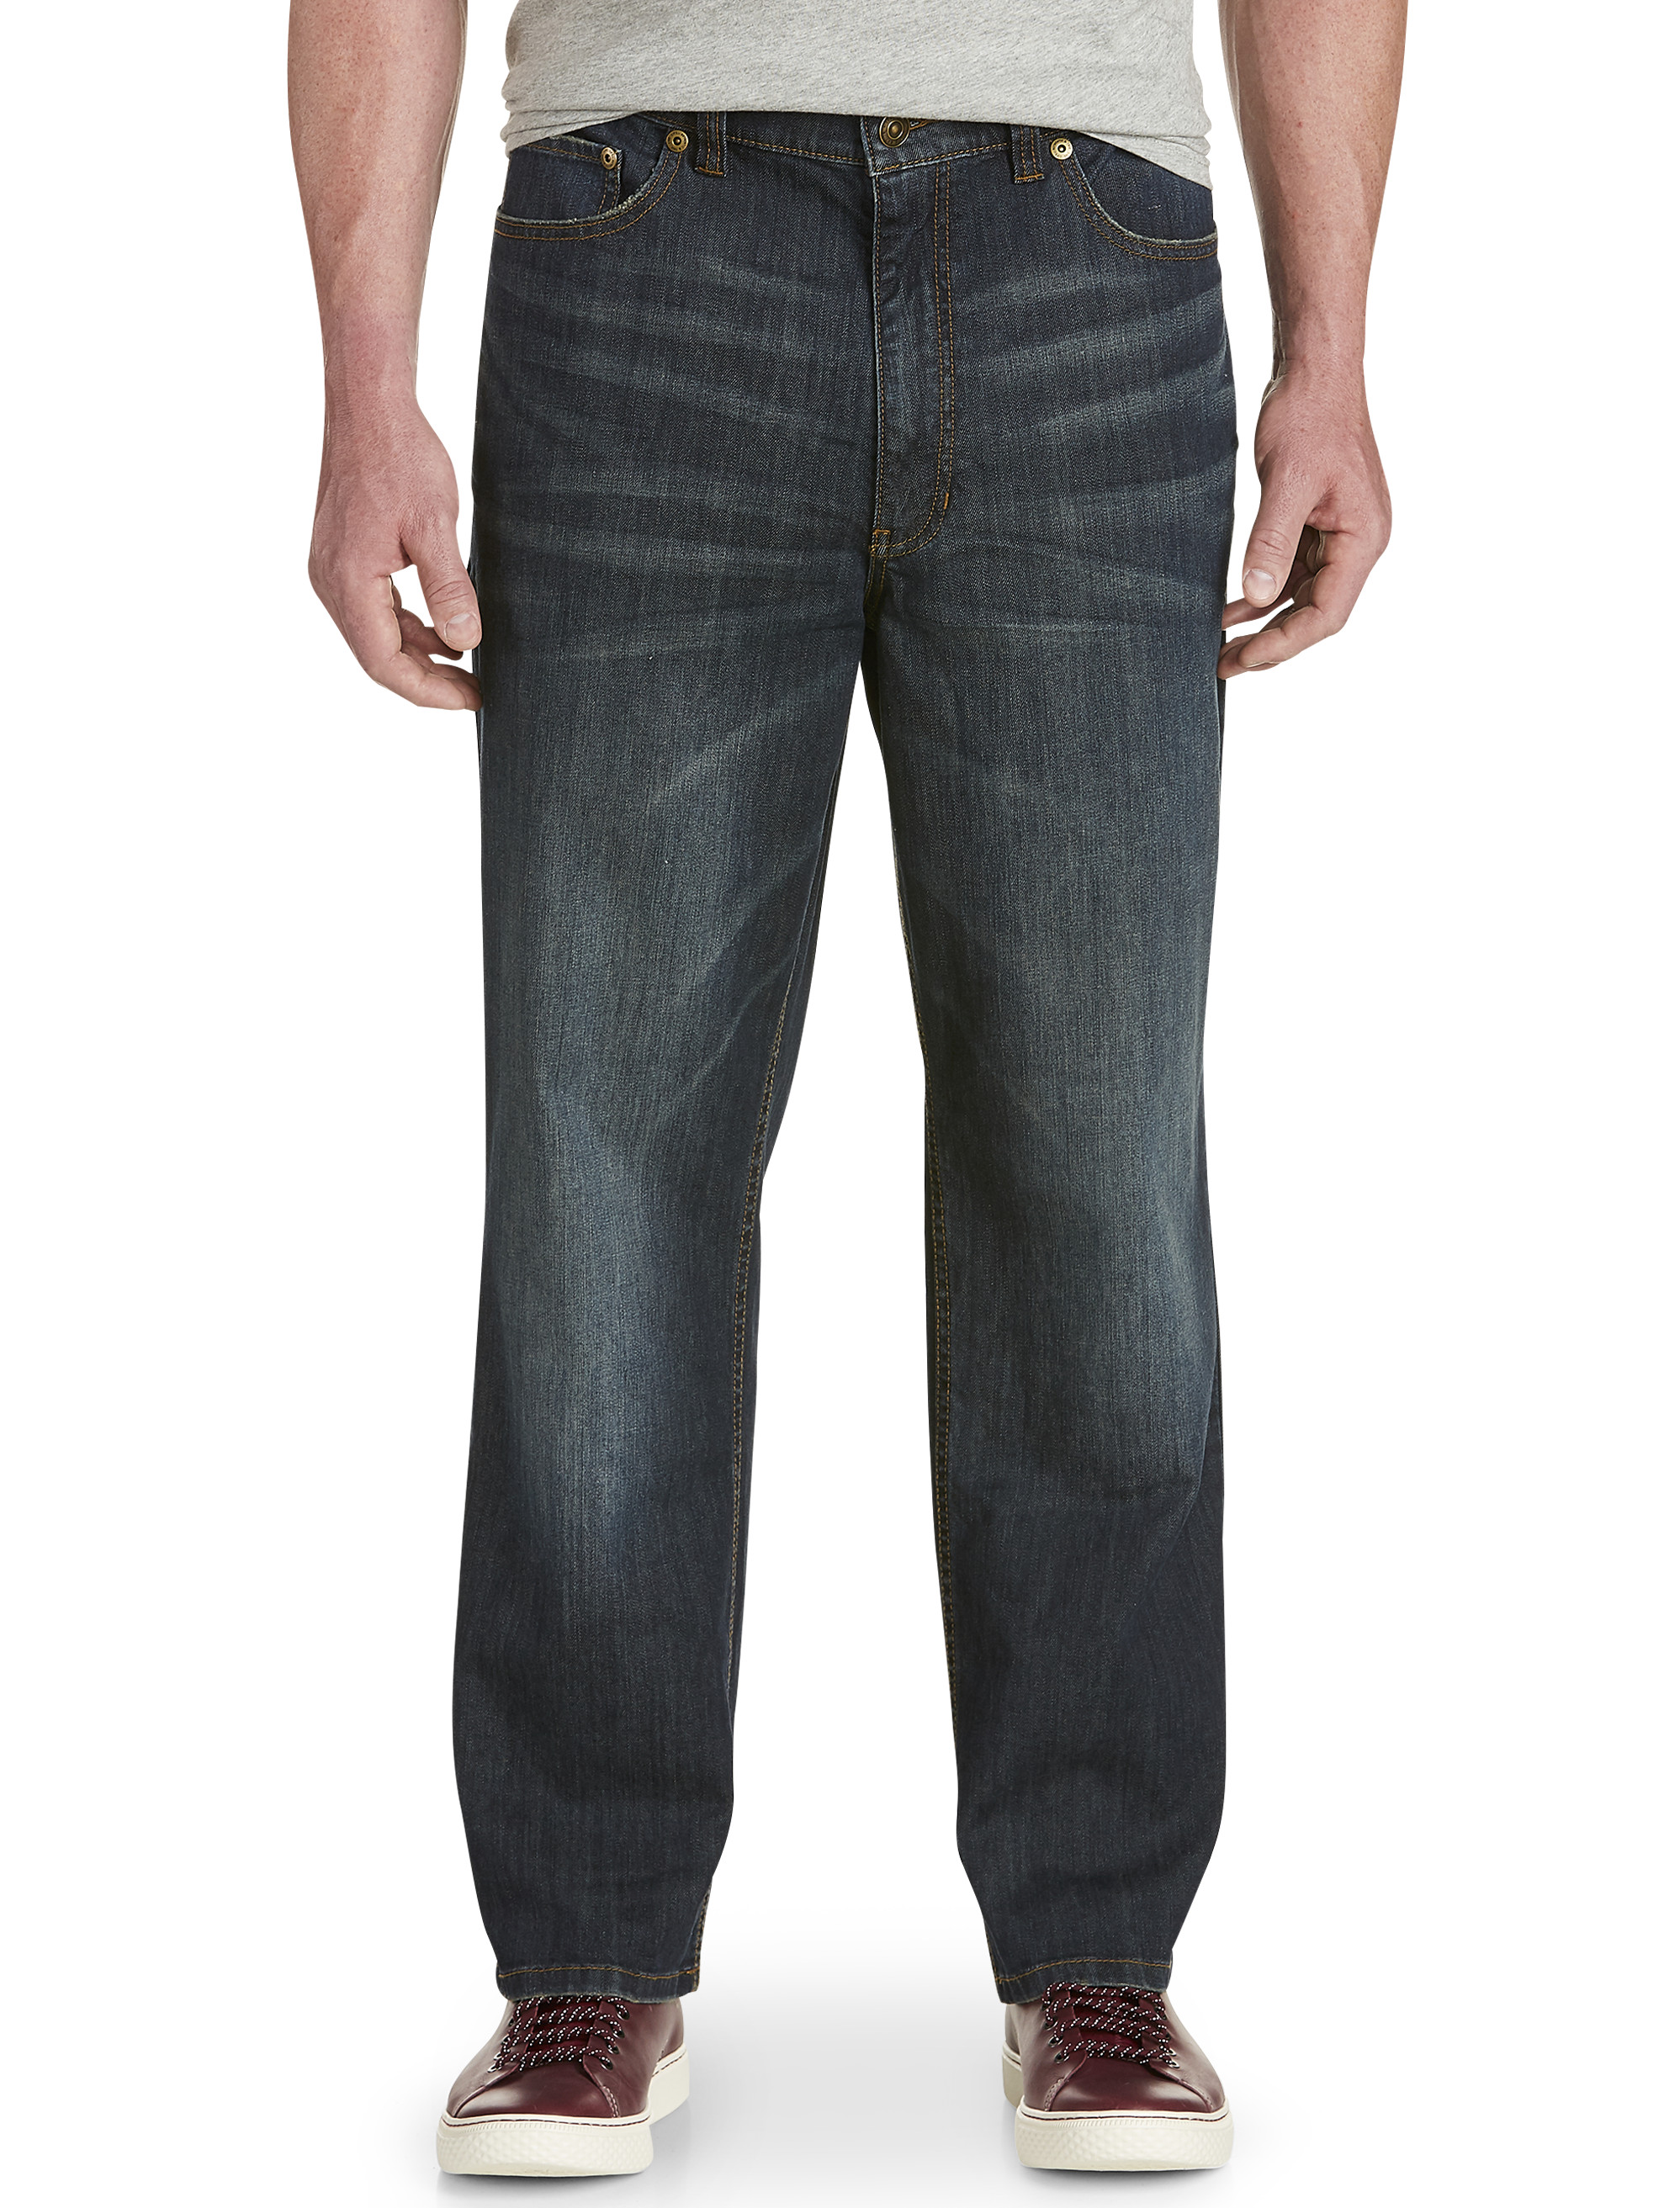 true nation athletic fit jeans